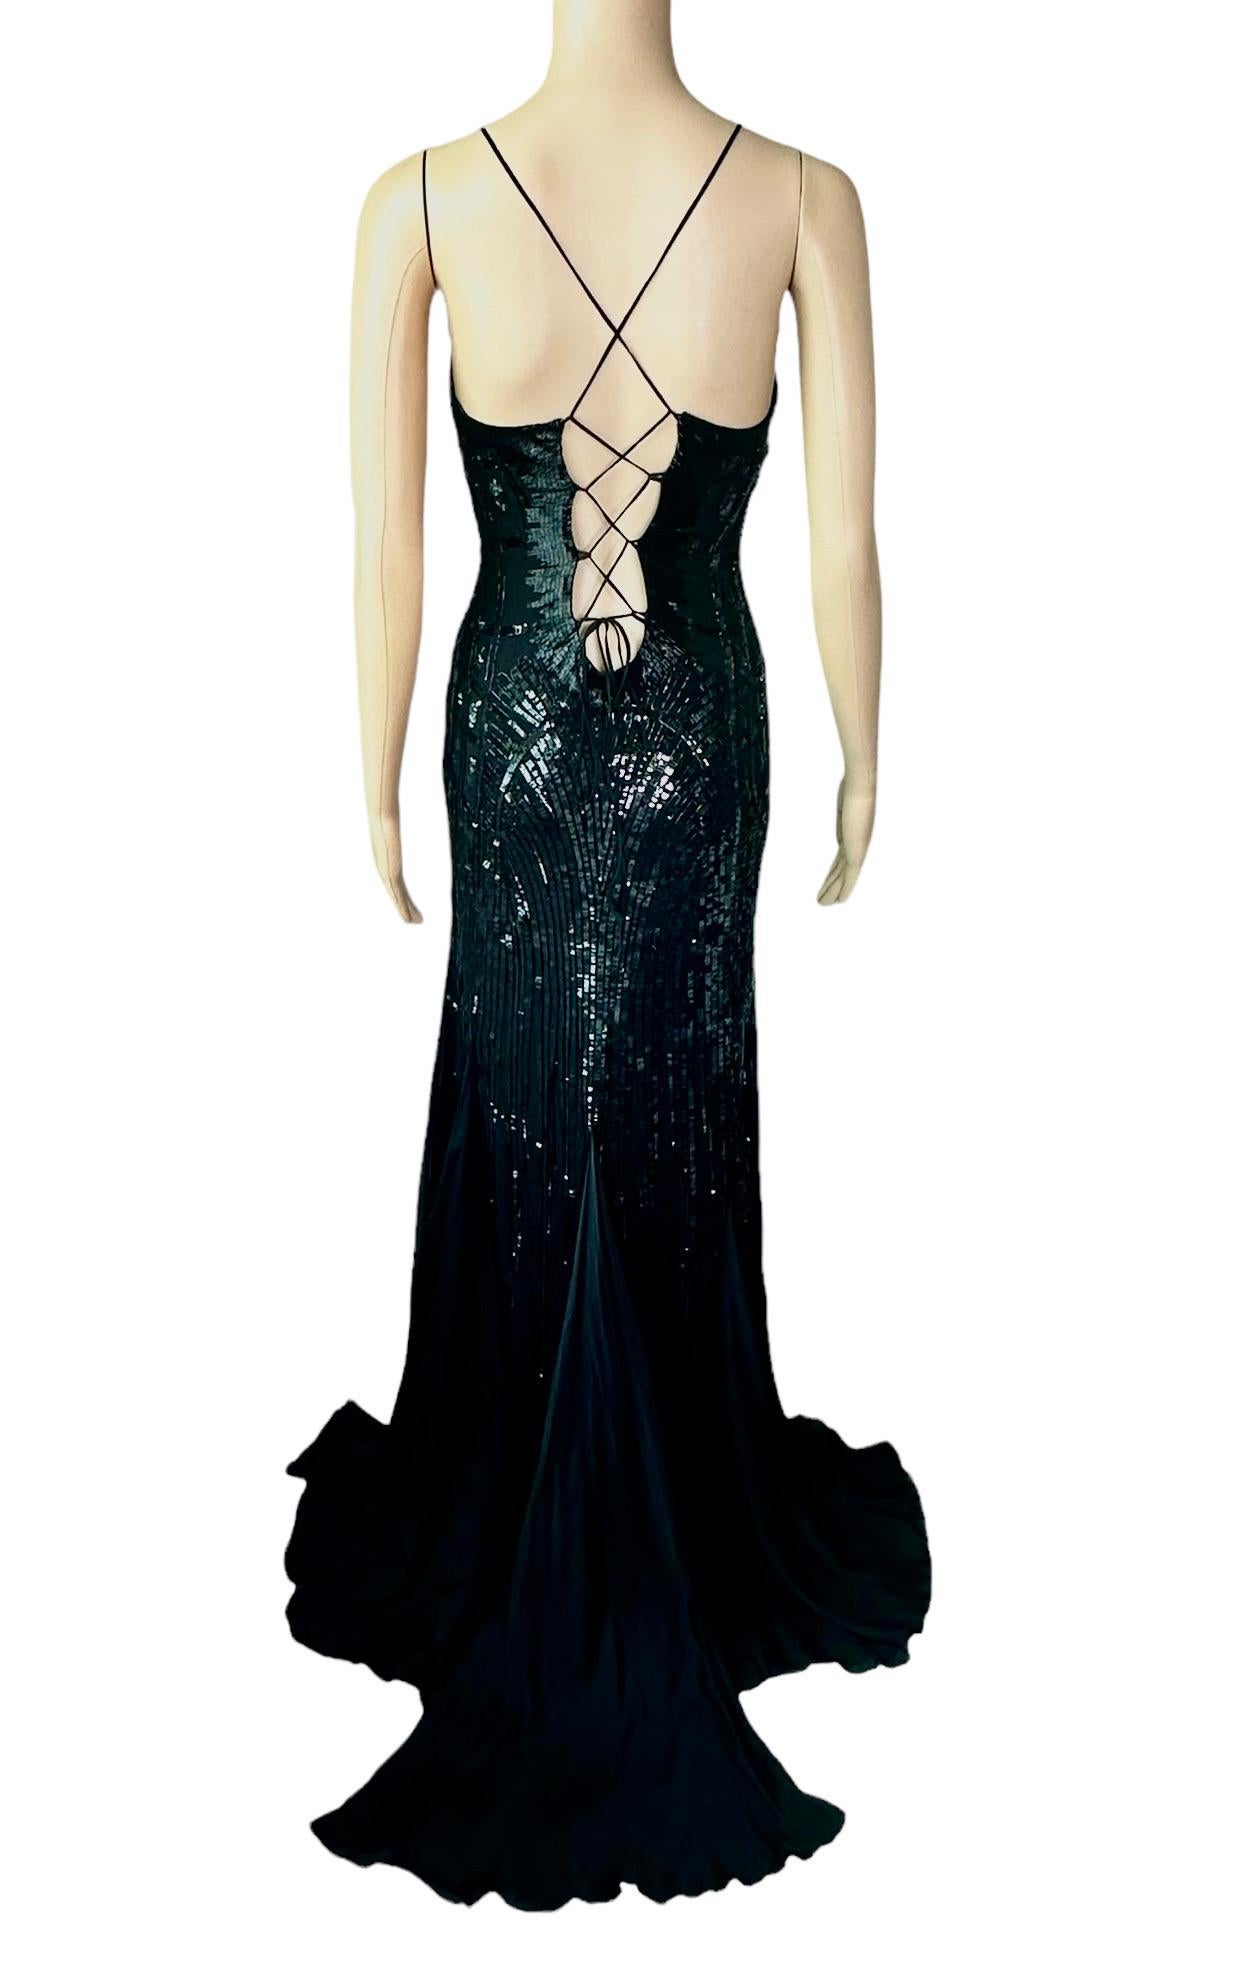 Roberto Cavalli S/S 2011 Embellished Plunged Lace Up Black Evening Dress Gown 1